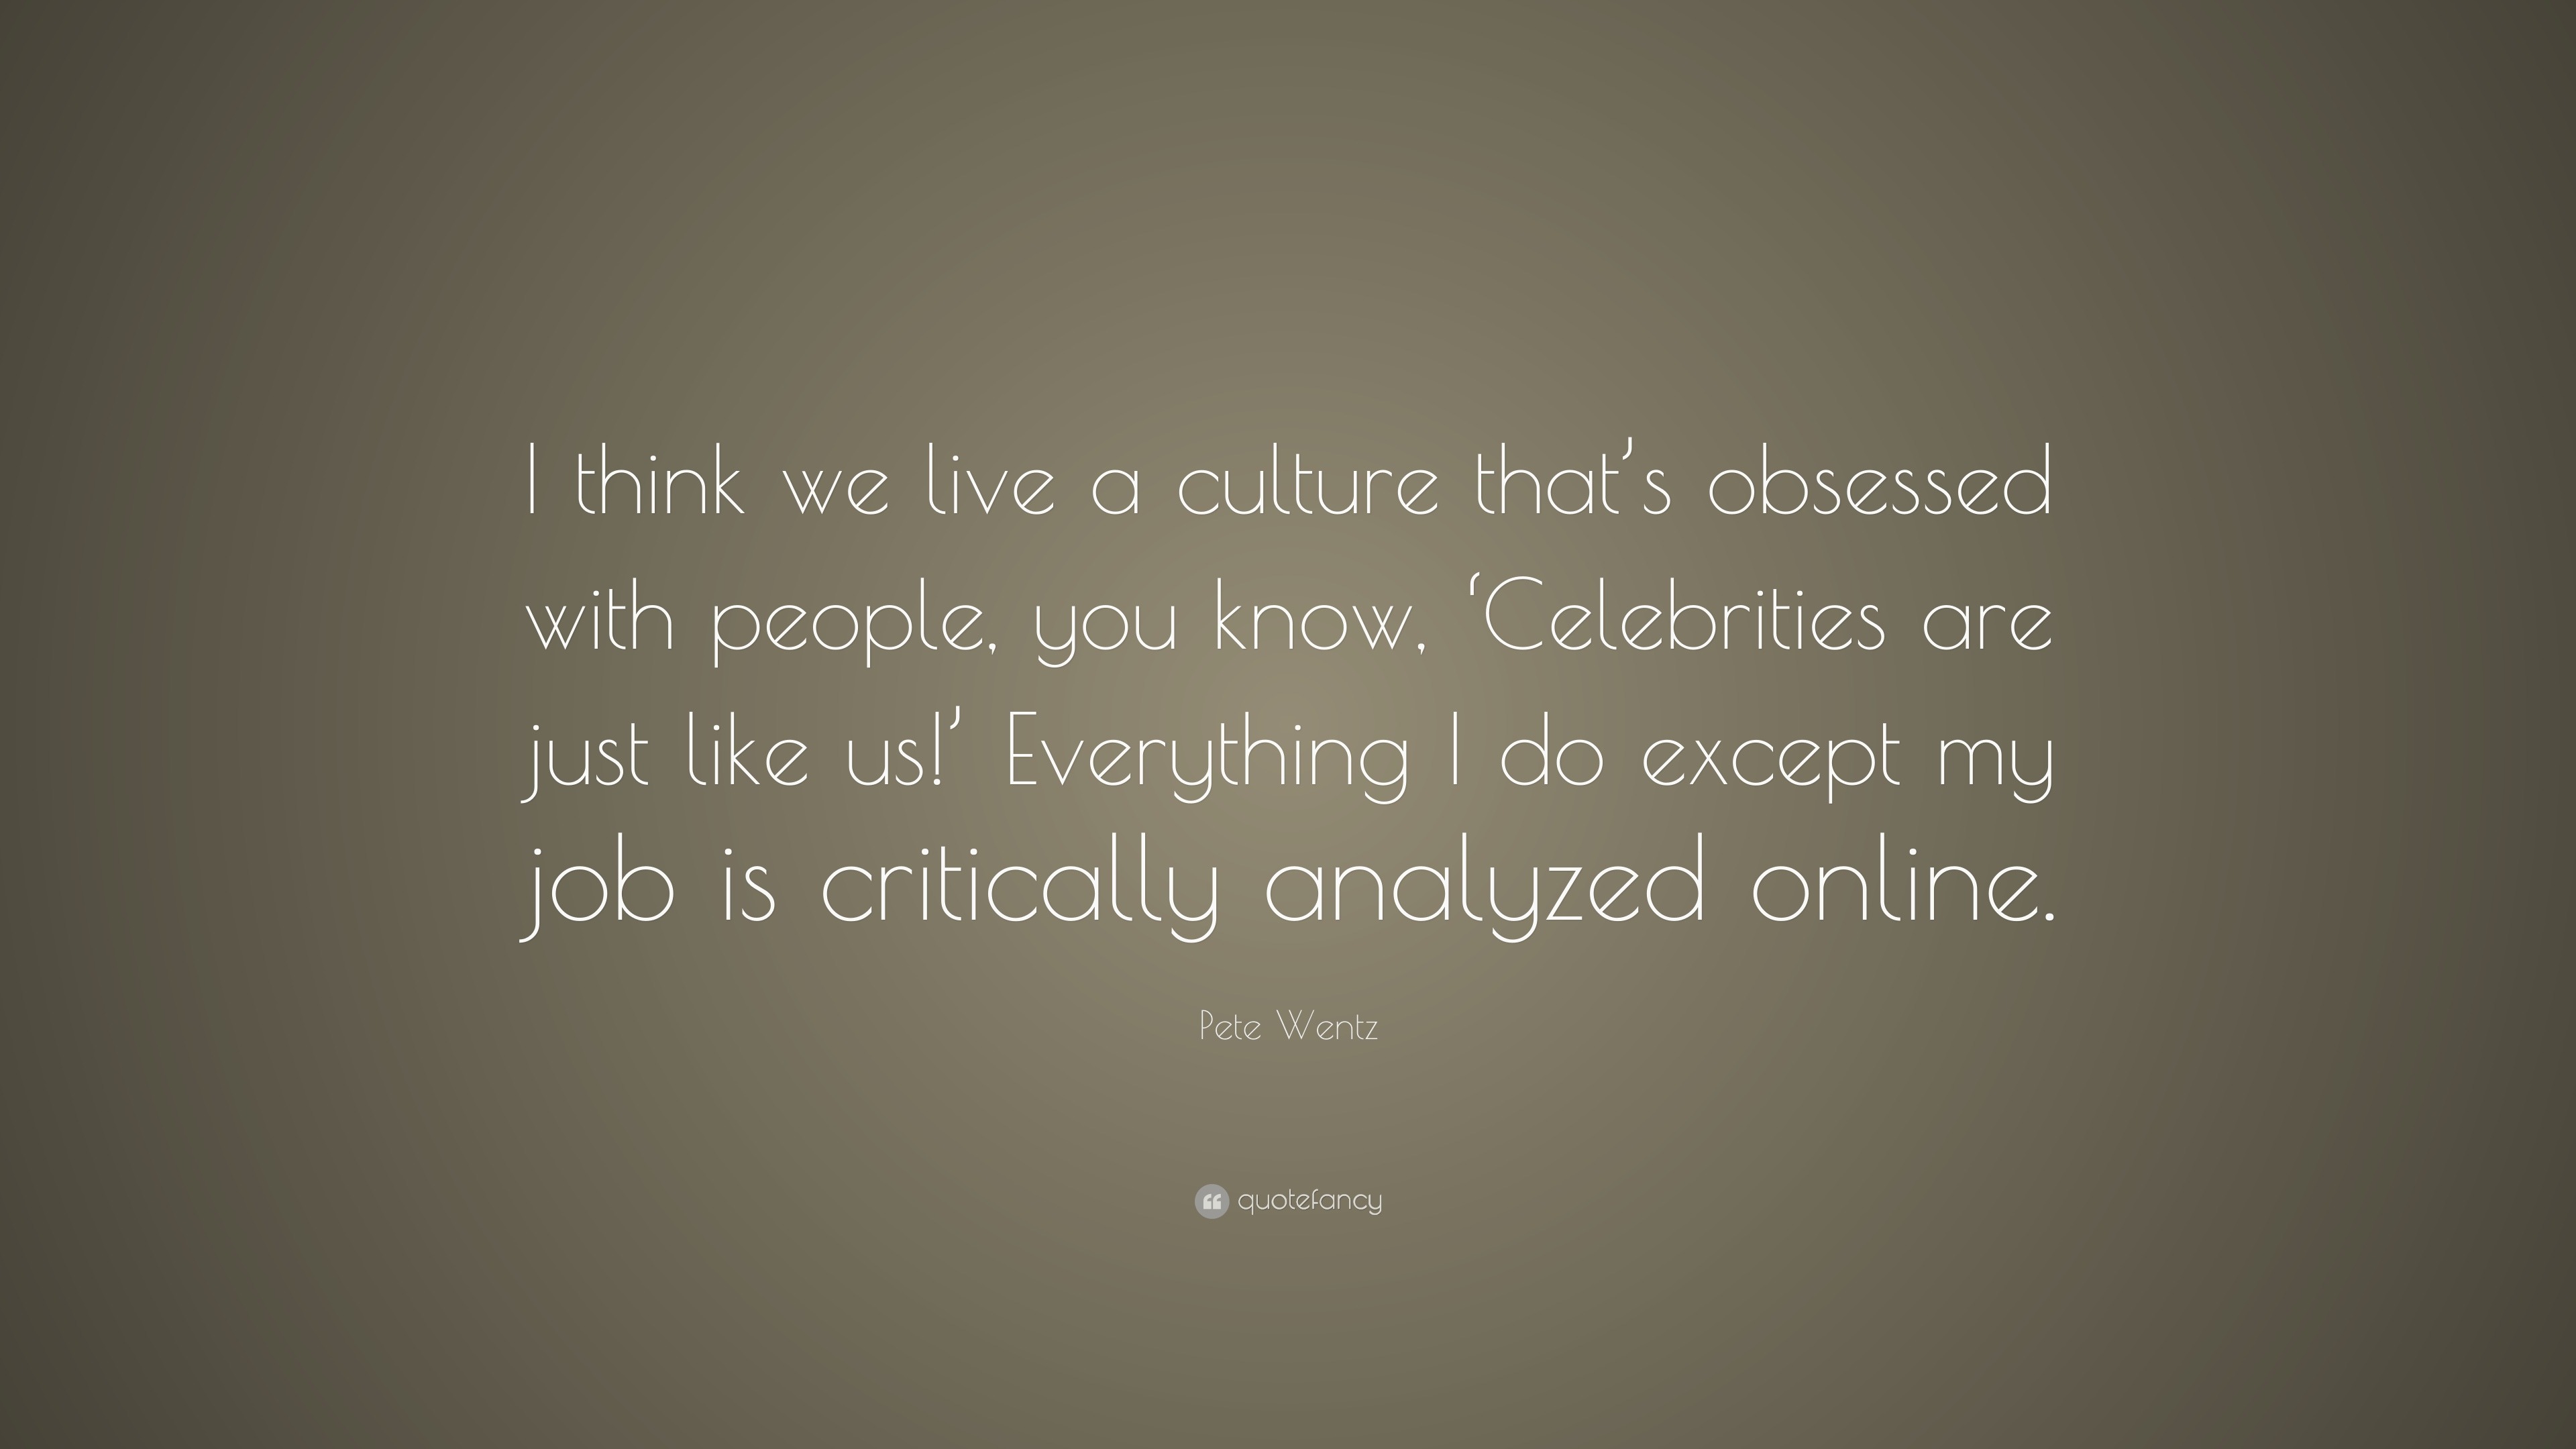 Pete Wentz Quote I Think We Live A Culture That S Obsessed With Images, Photos, Reviews